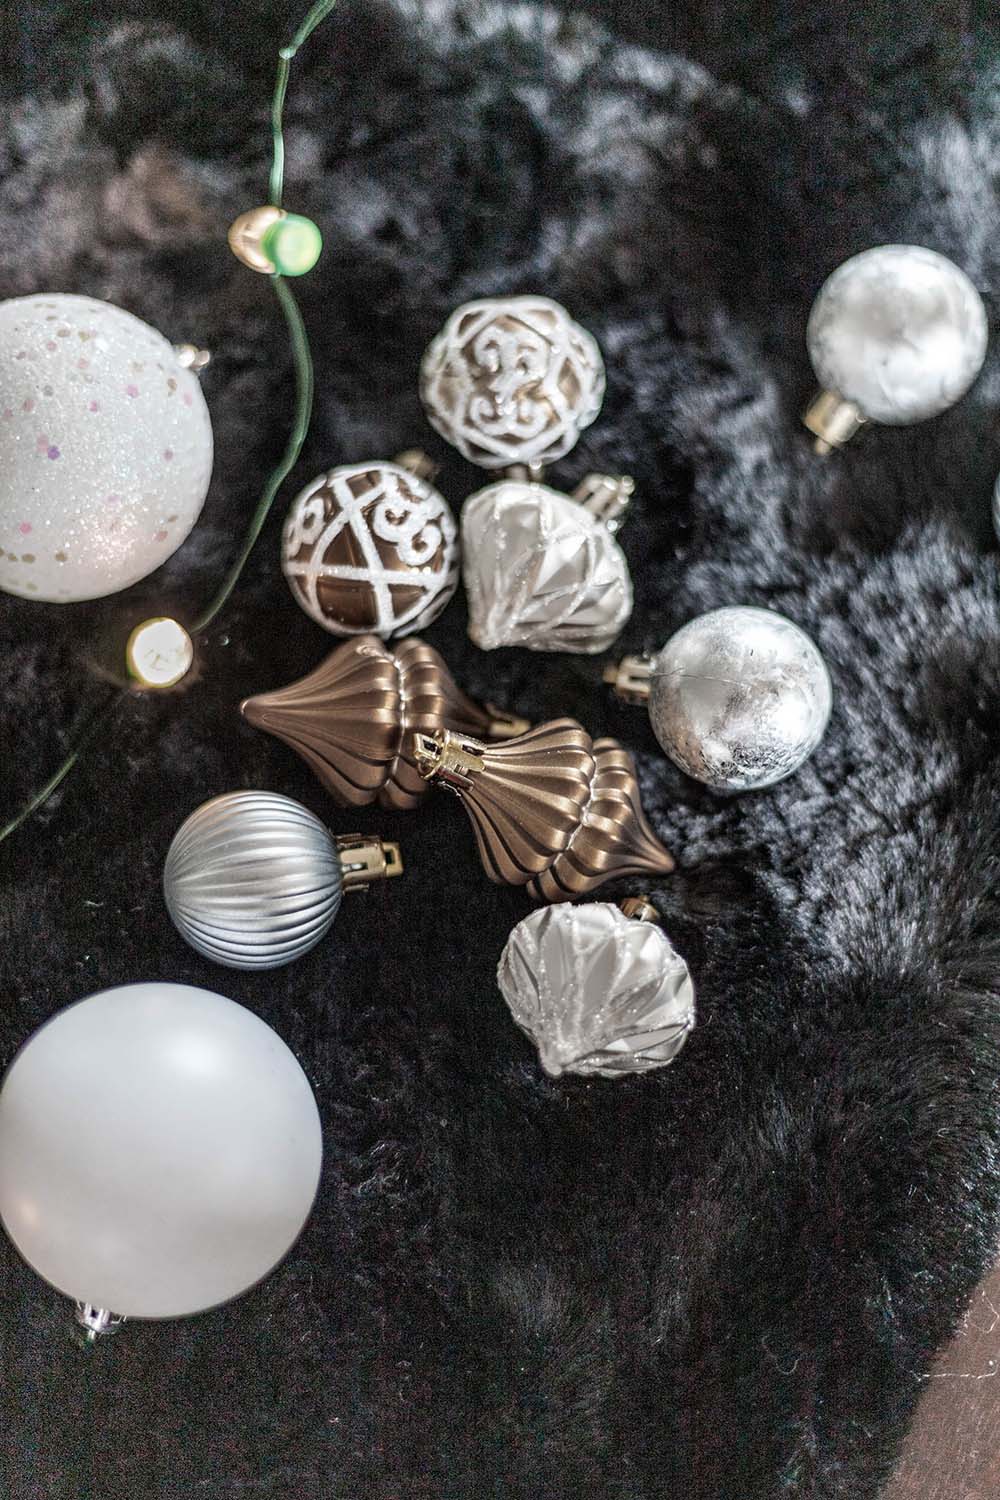 A group of silver and bronze ornaments sitting on a fuzzy blanket.